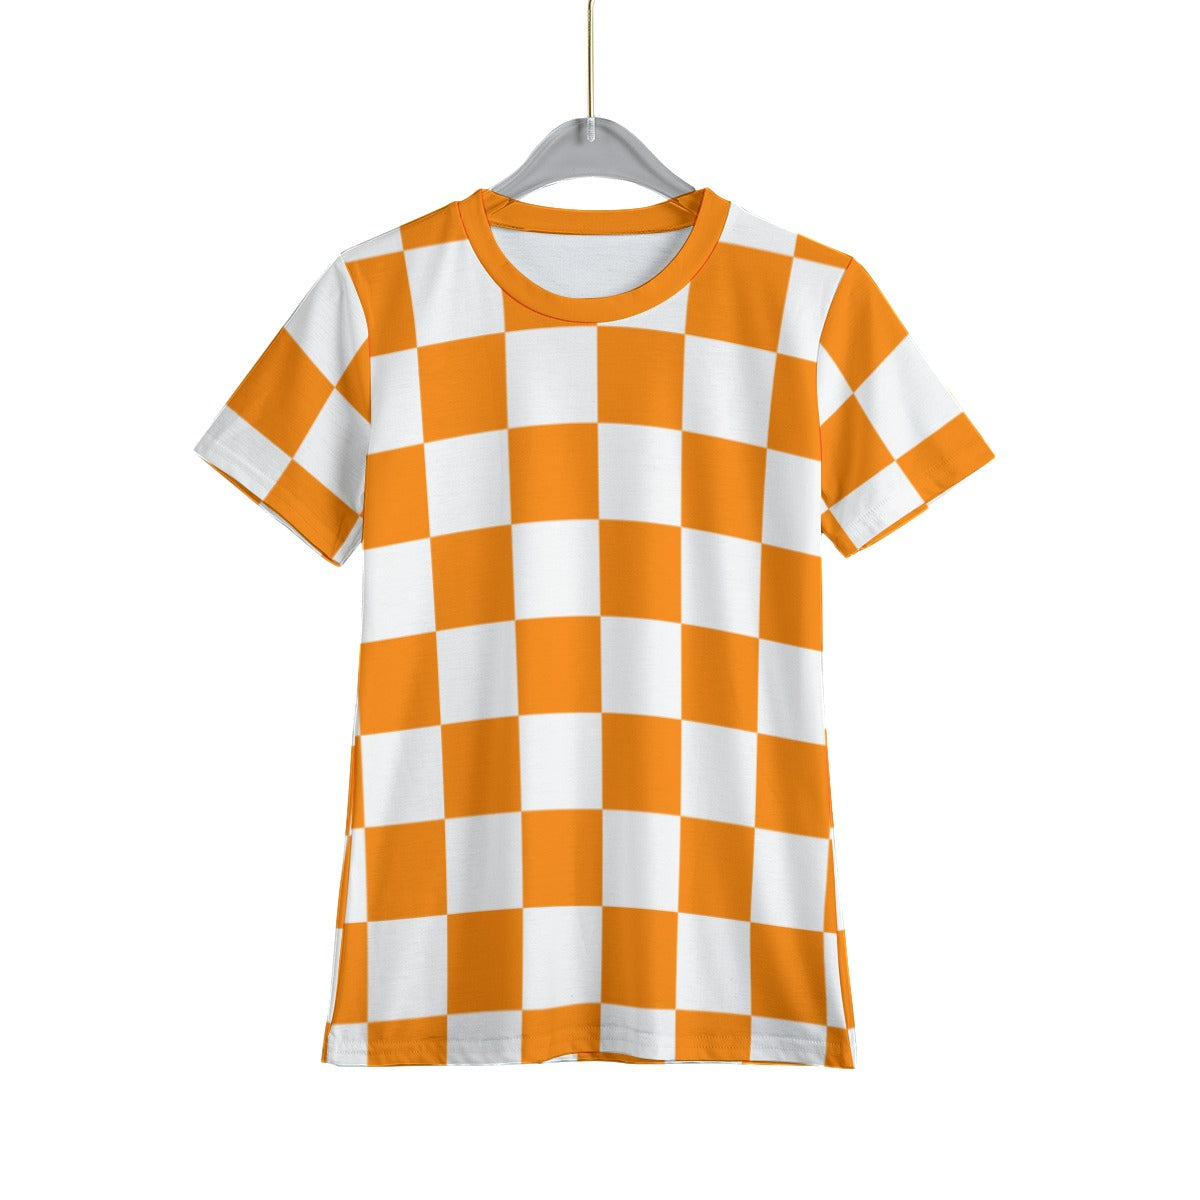 Youth Unisex Checkerboard T-Shirt